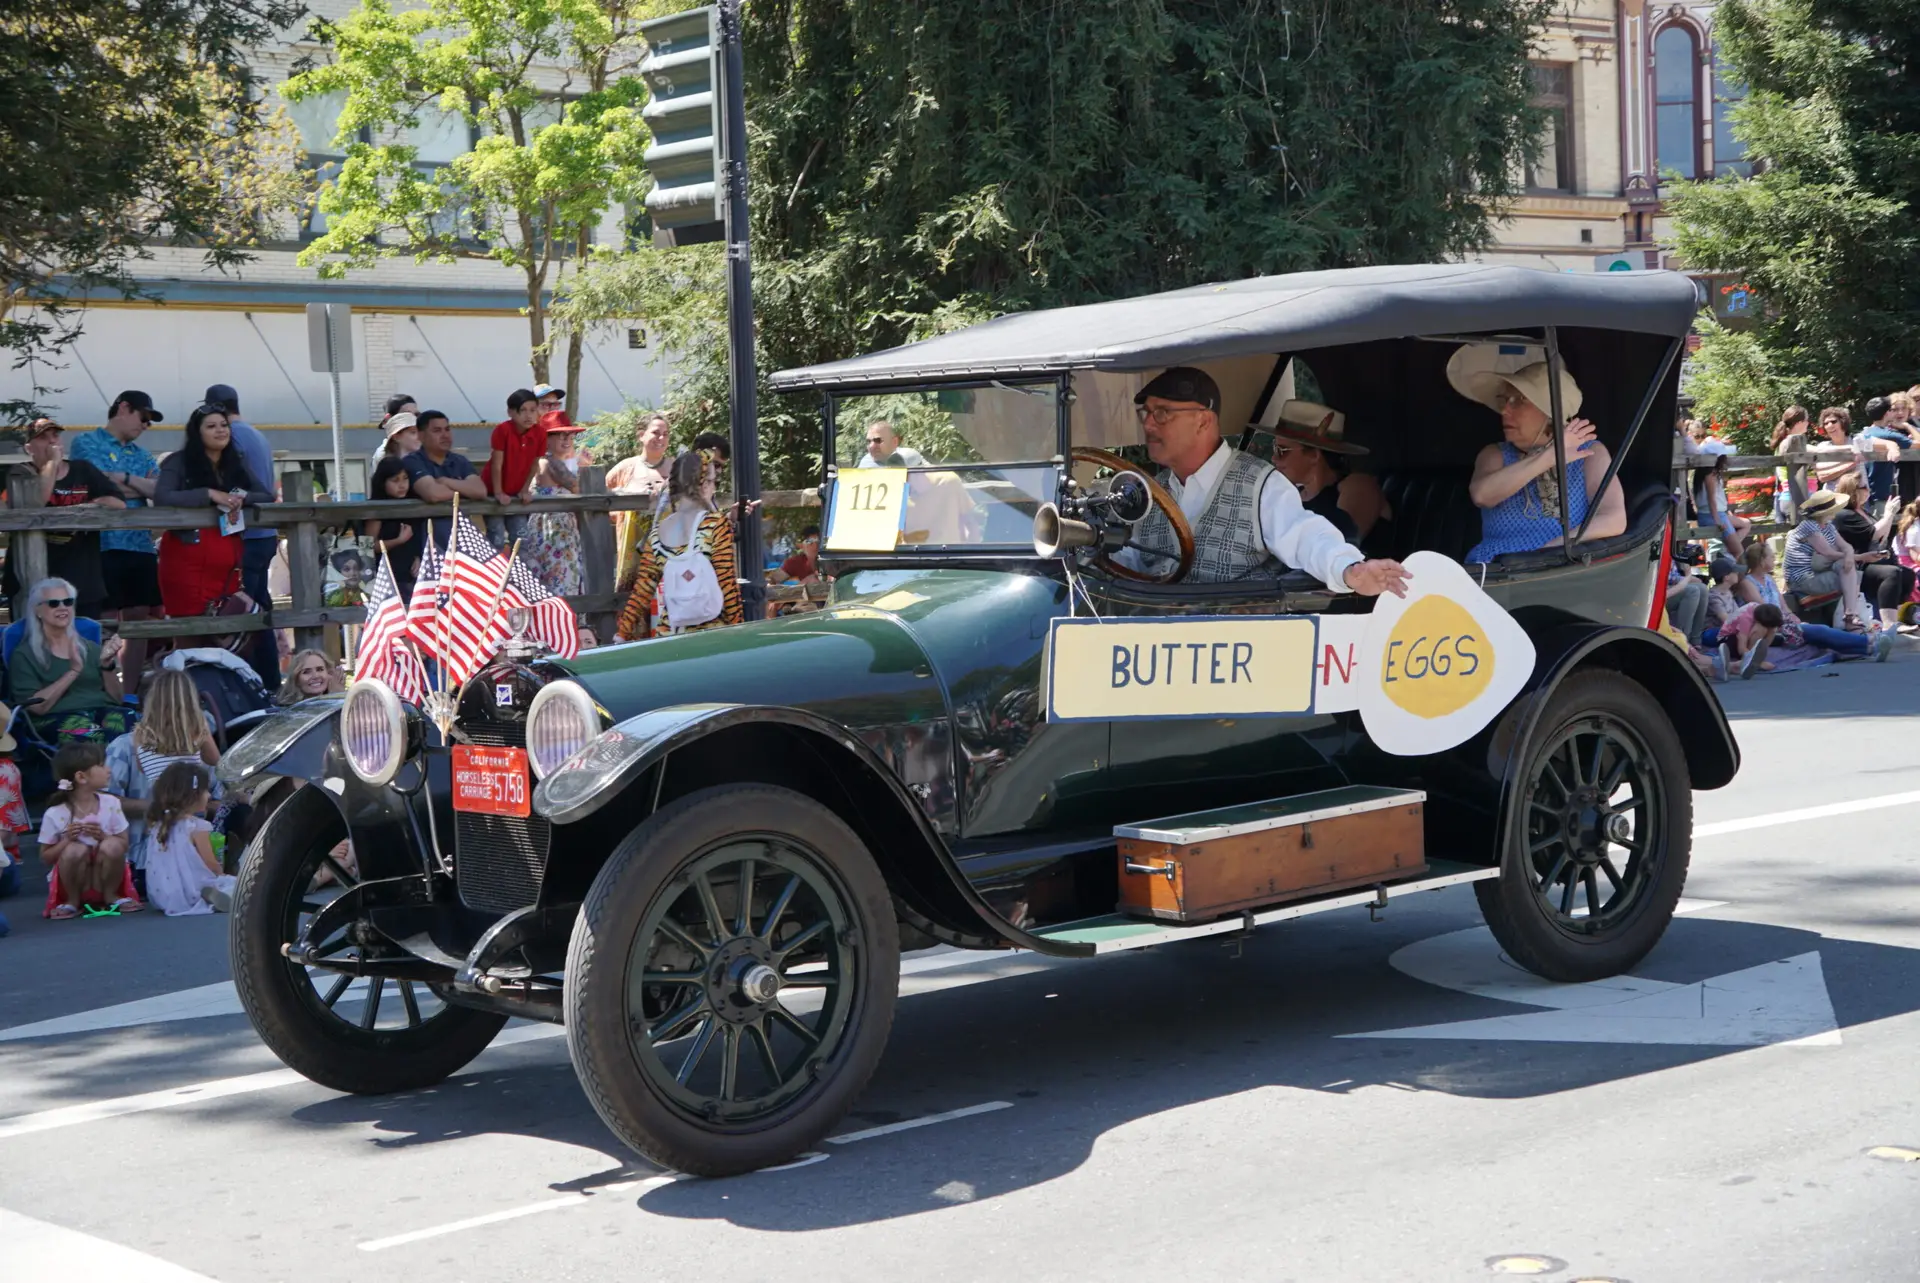 Old car with sign saying "Butter 'n Eggs" at the Butter and Eggs Day Parade, every April in the North Bay's Petaluma, California